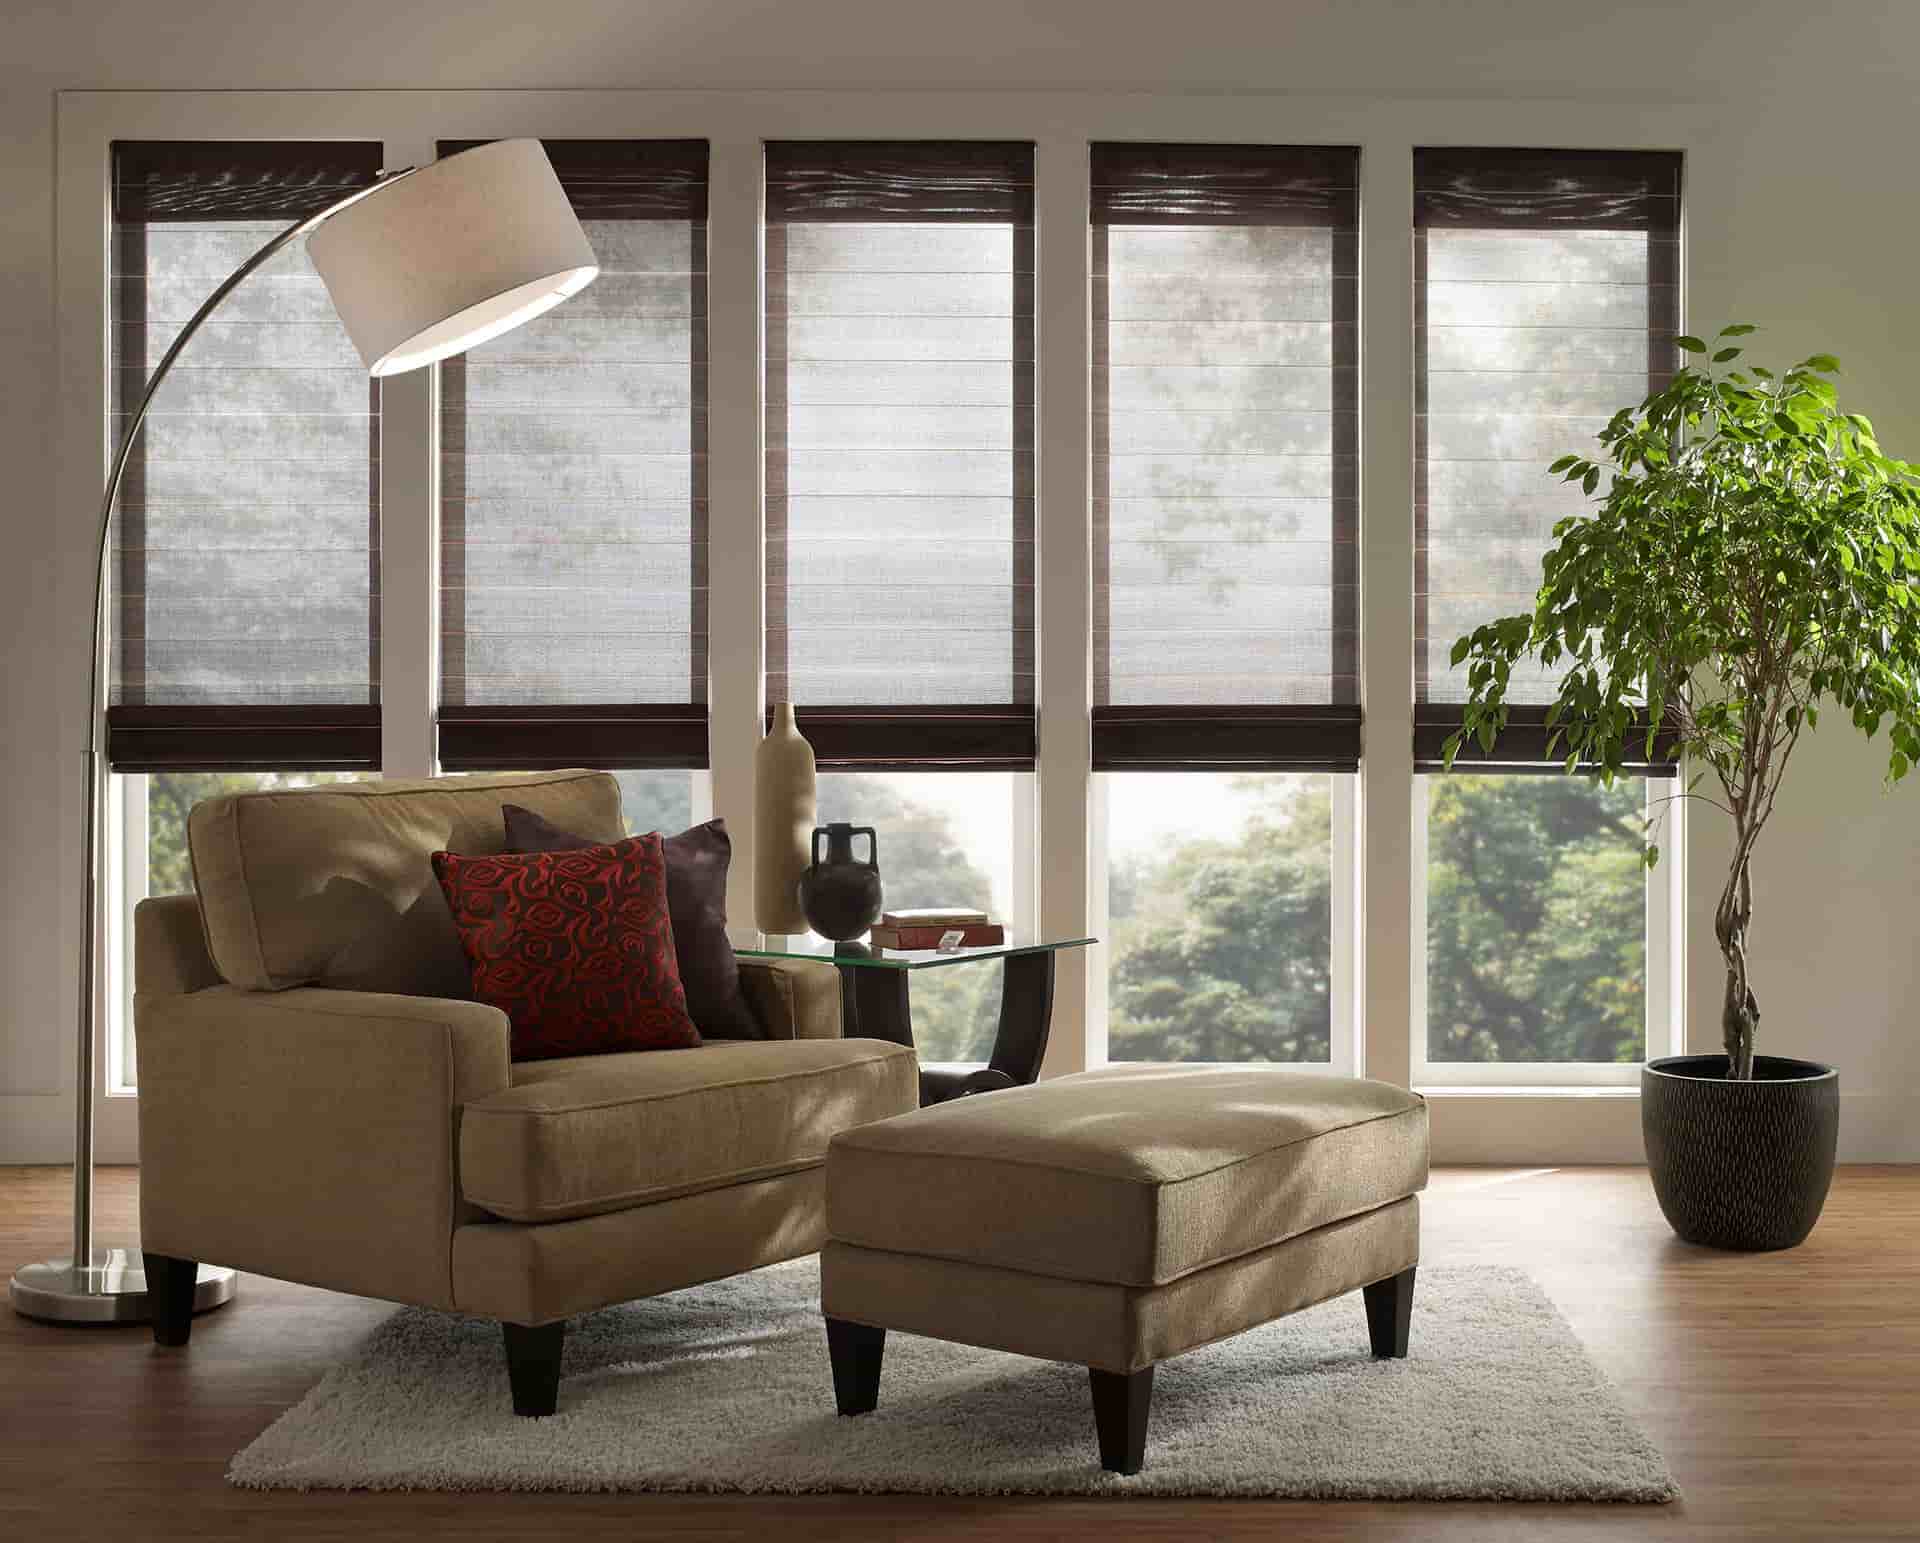 A Look at Lutron Serena Shades featured image